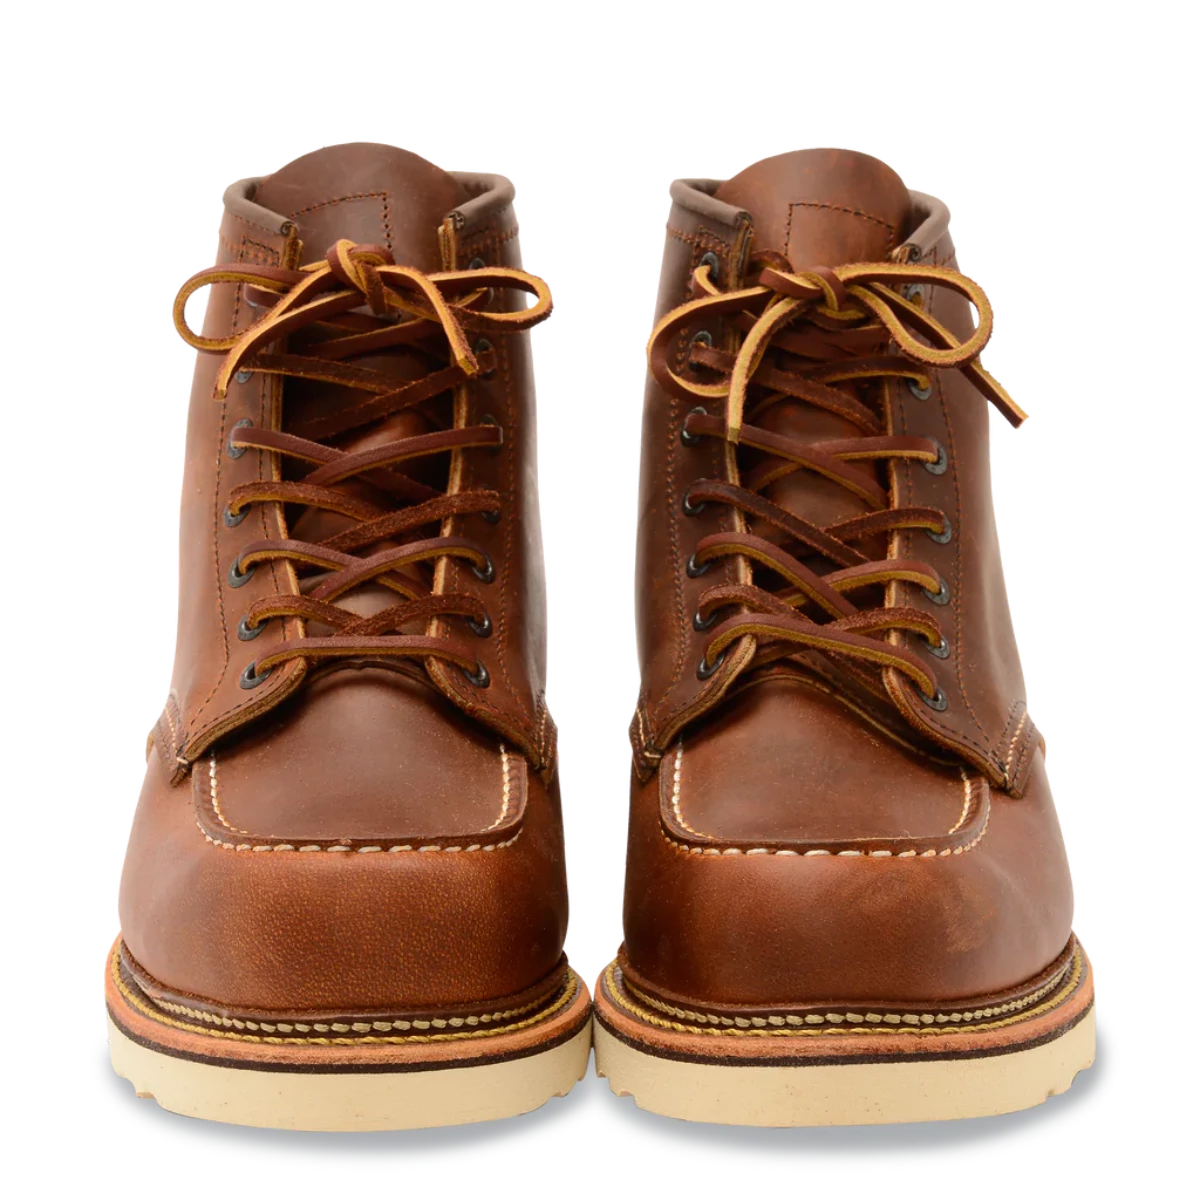 Red Wing - Classic Moc Toe - 1907 - Copper Rough and Tough